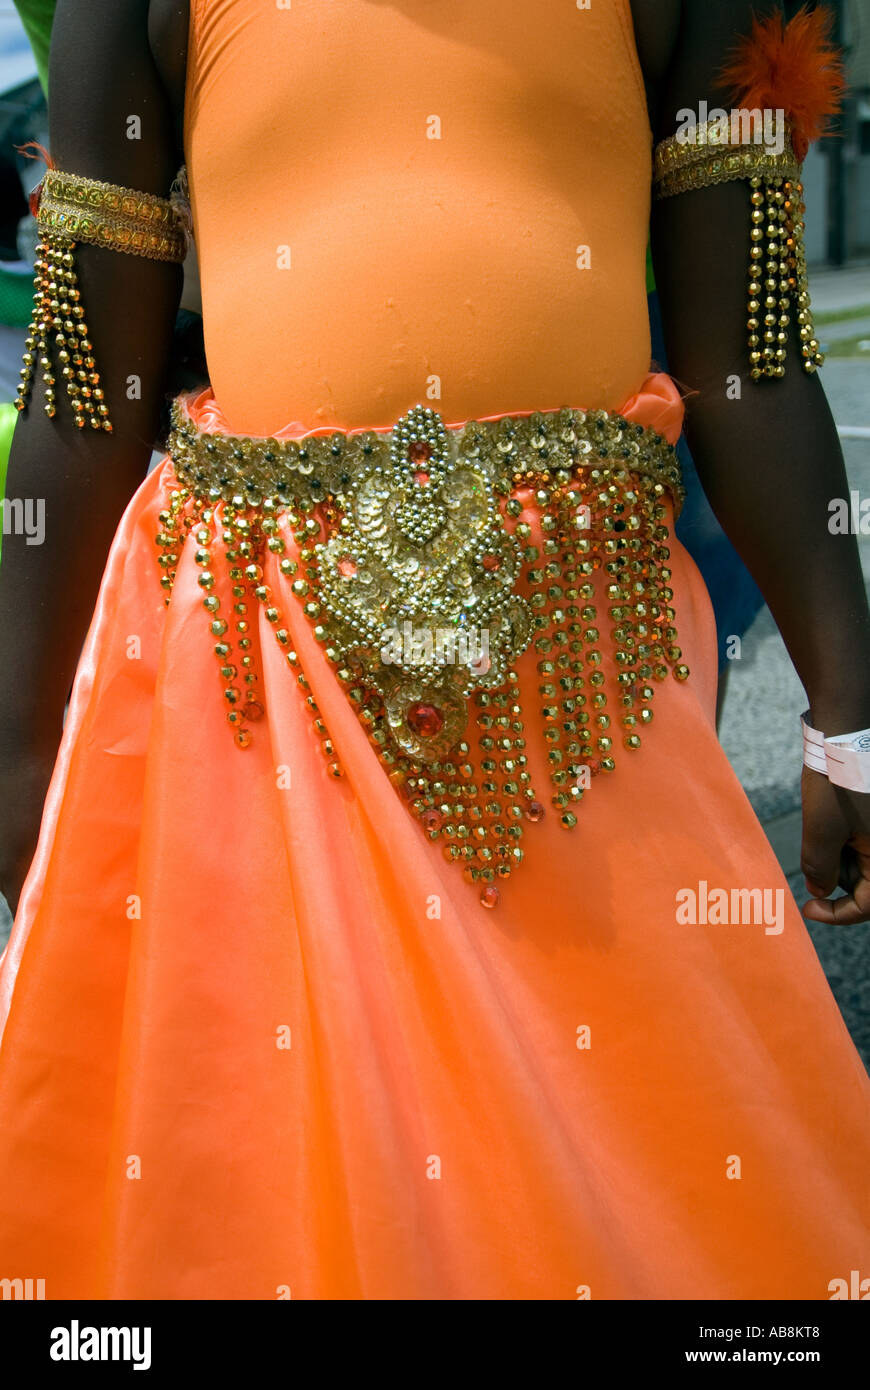 West Indies Trinidad Carnival Port of Spain Colorful orange costume on teen girl dancing in parade Stock Photo